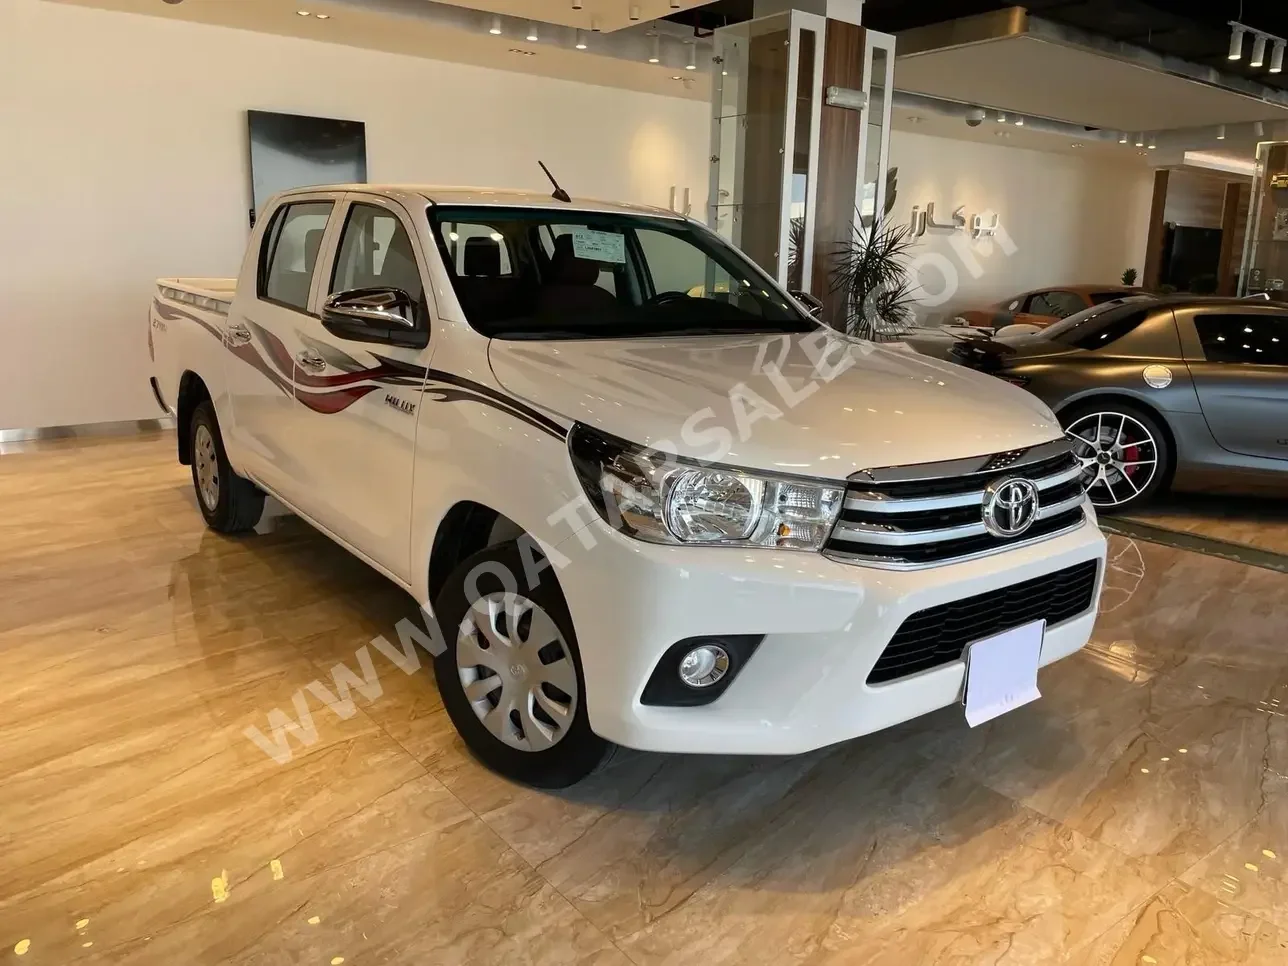 Toyota  Hilux  2020  Automatic  35,000 Km  4 Cylinder  Rear Wheel Drive (RWD)  Pick Up  White